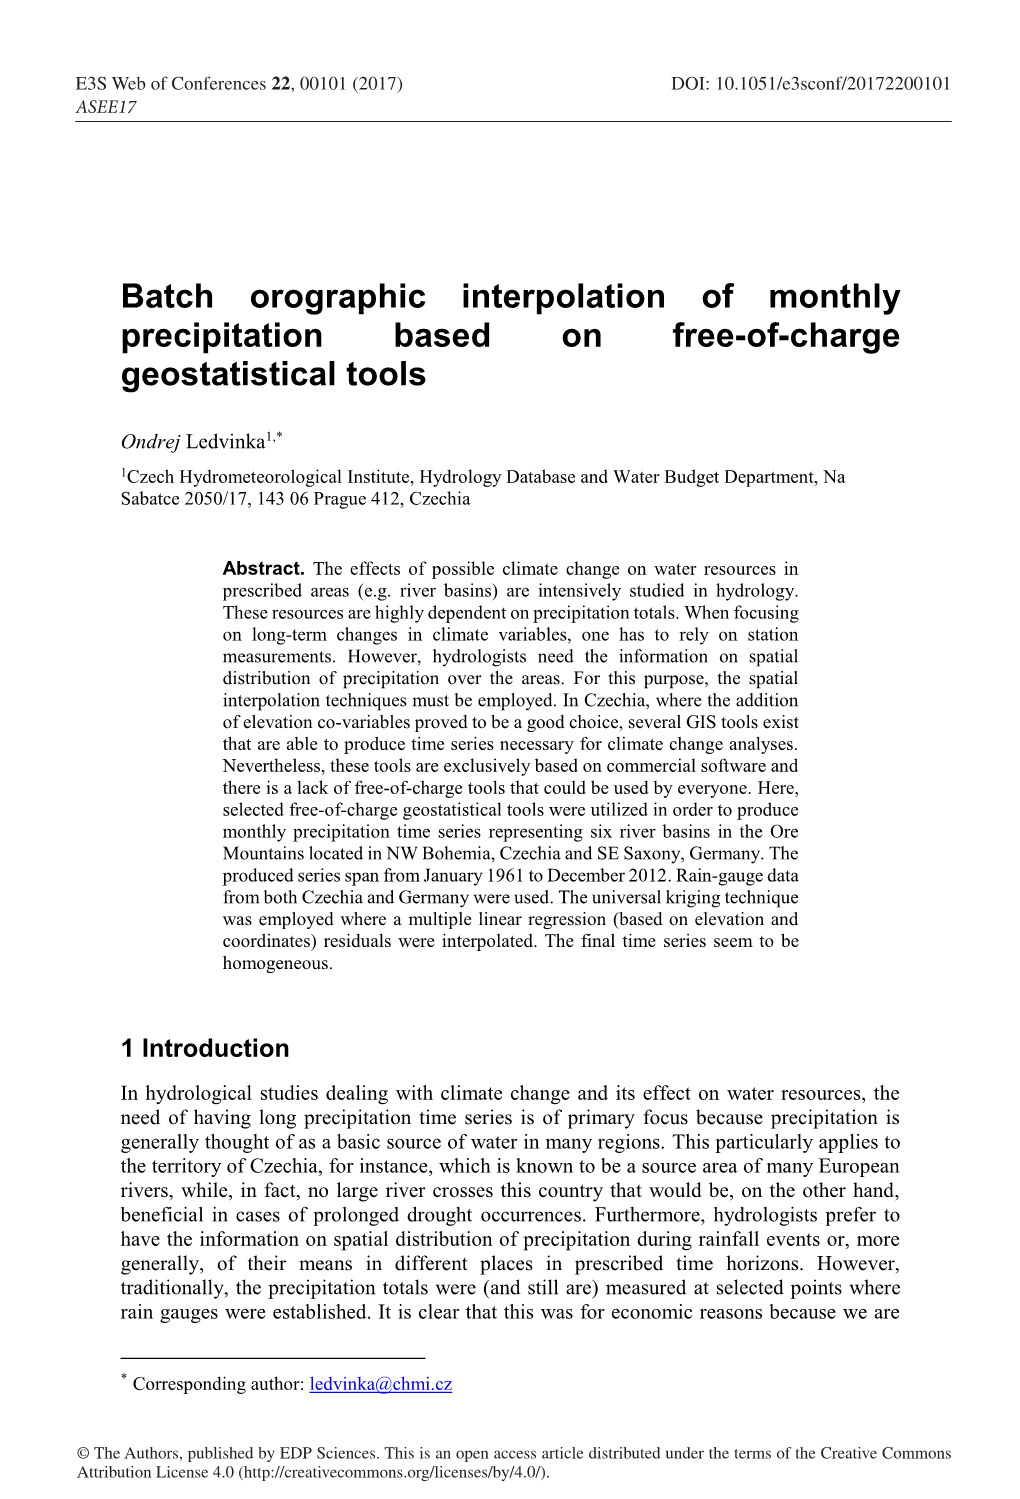 Batch Orographic Interpolation of Monthly Precipitation Based on Free-Of-Charge Geostatistical Tools